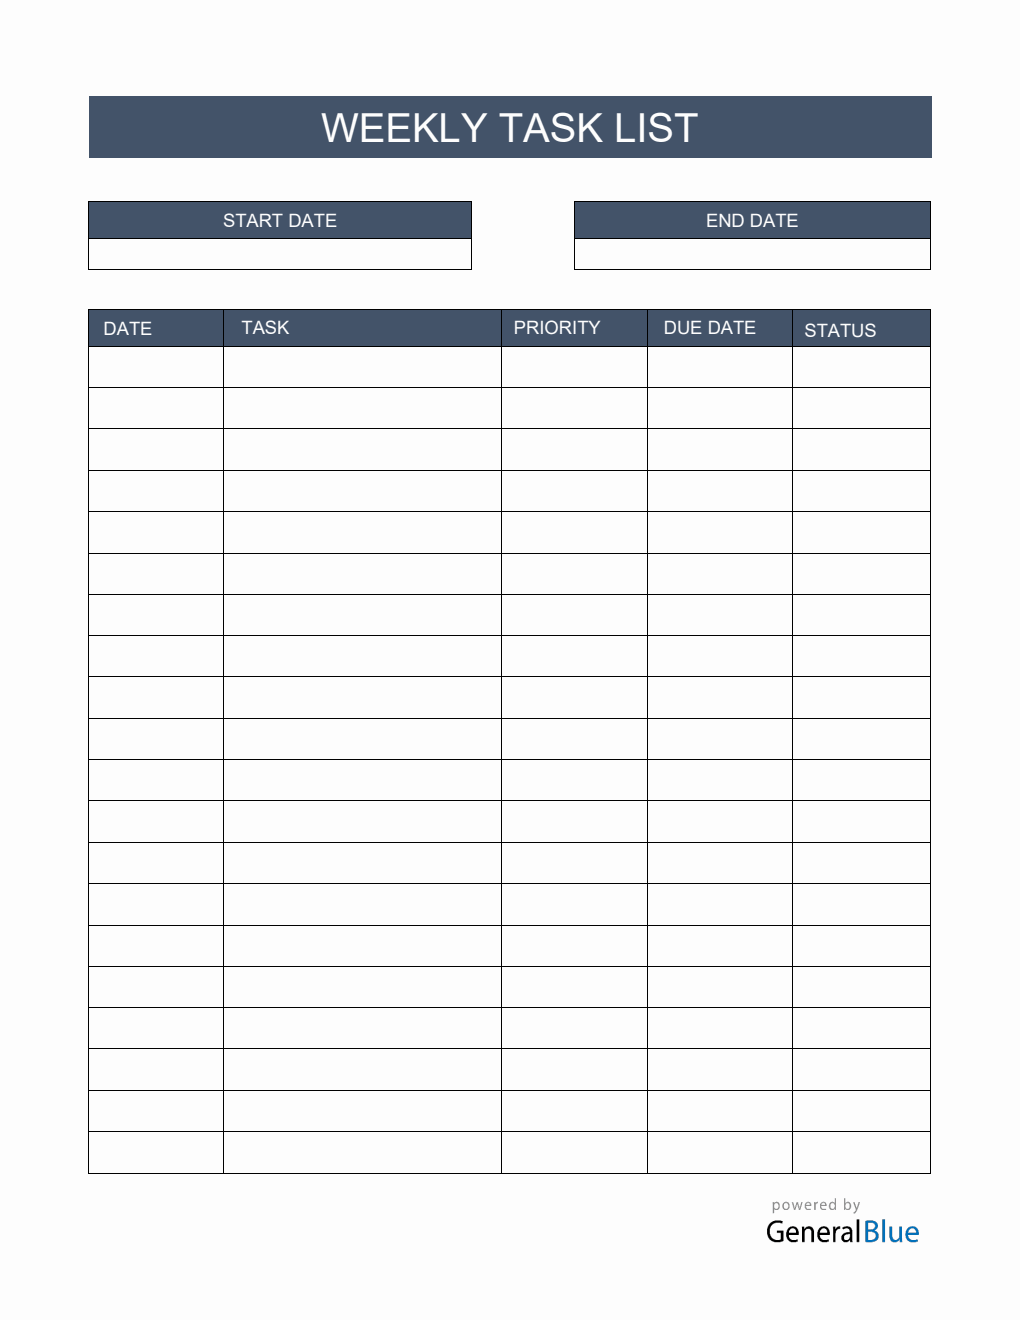 Checklist Template – 38+ Free Word, Excel, PDF Documents Download!